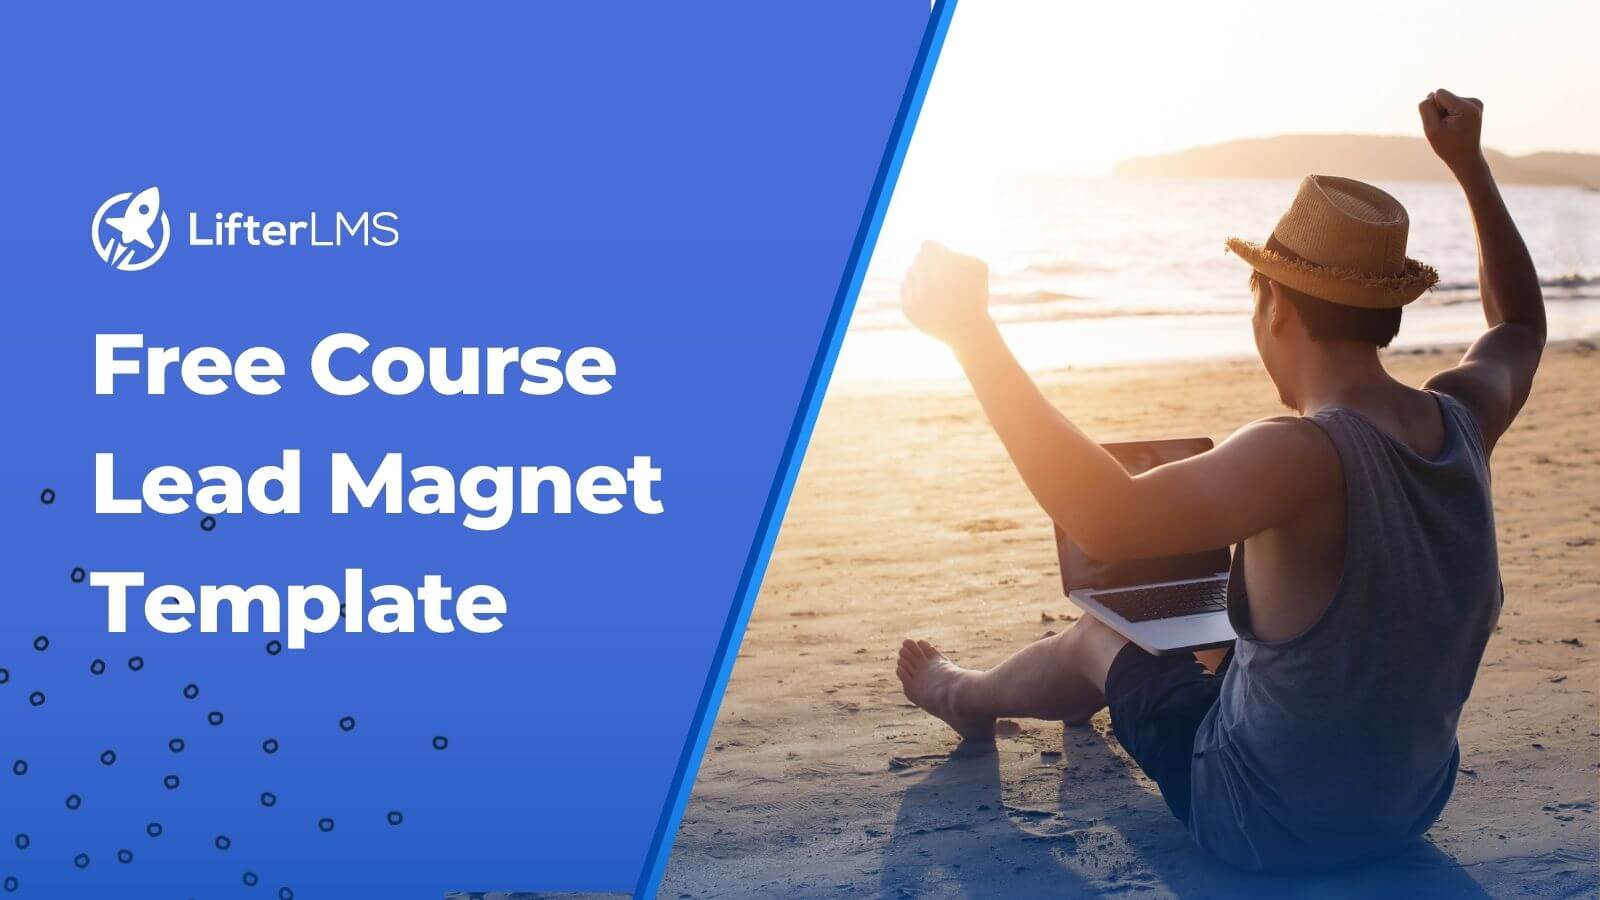 You are currently viewing Free Course Lead Magnet Template